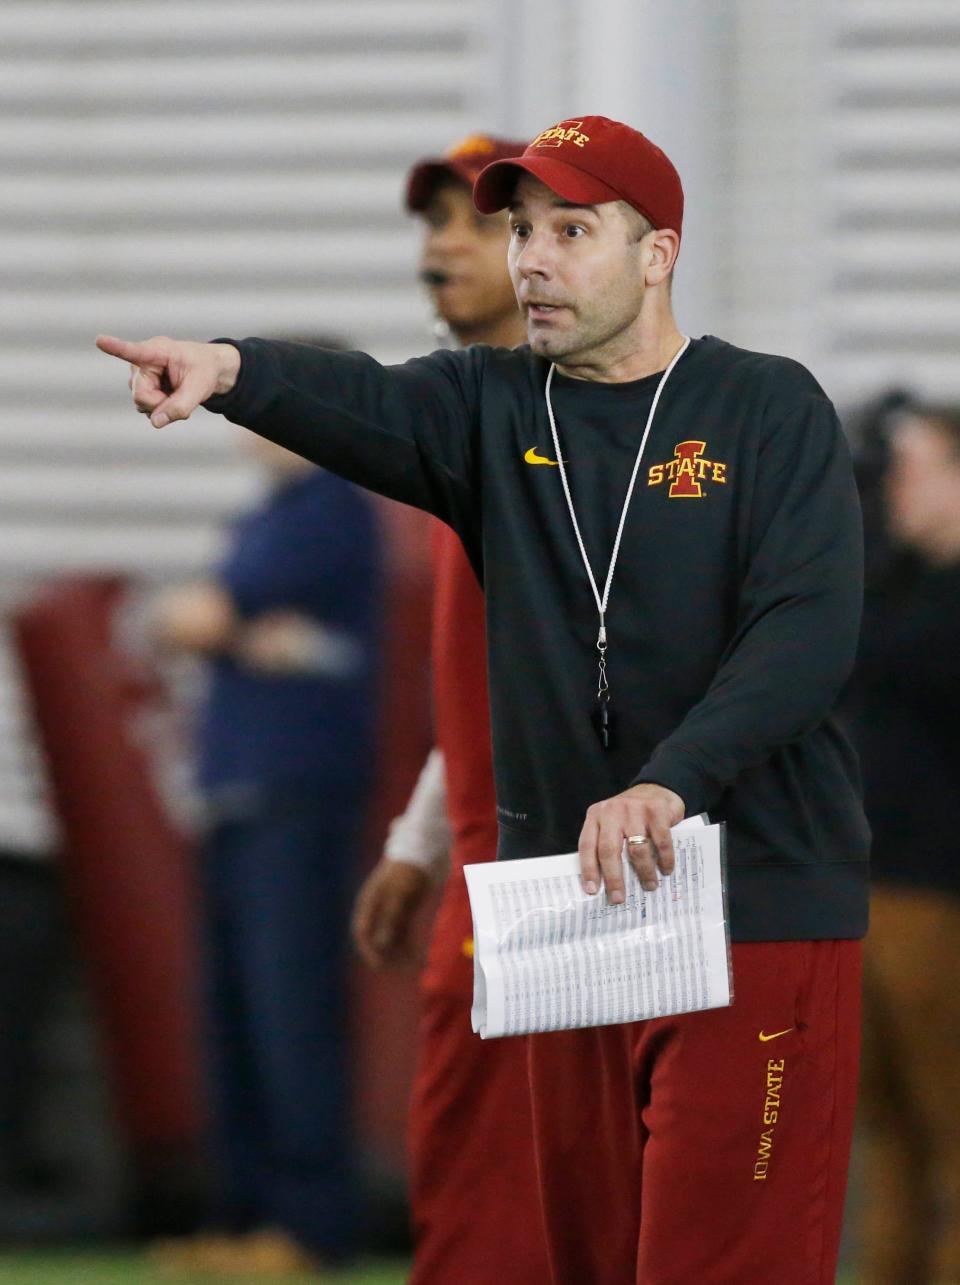 Tyson Veidt has been with Iowa State since 2016. He most recently was associate head coach/linebackers coach. He is expected to be new defensive coordinator for the Cincinnati Bearcats.